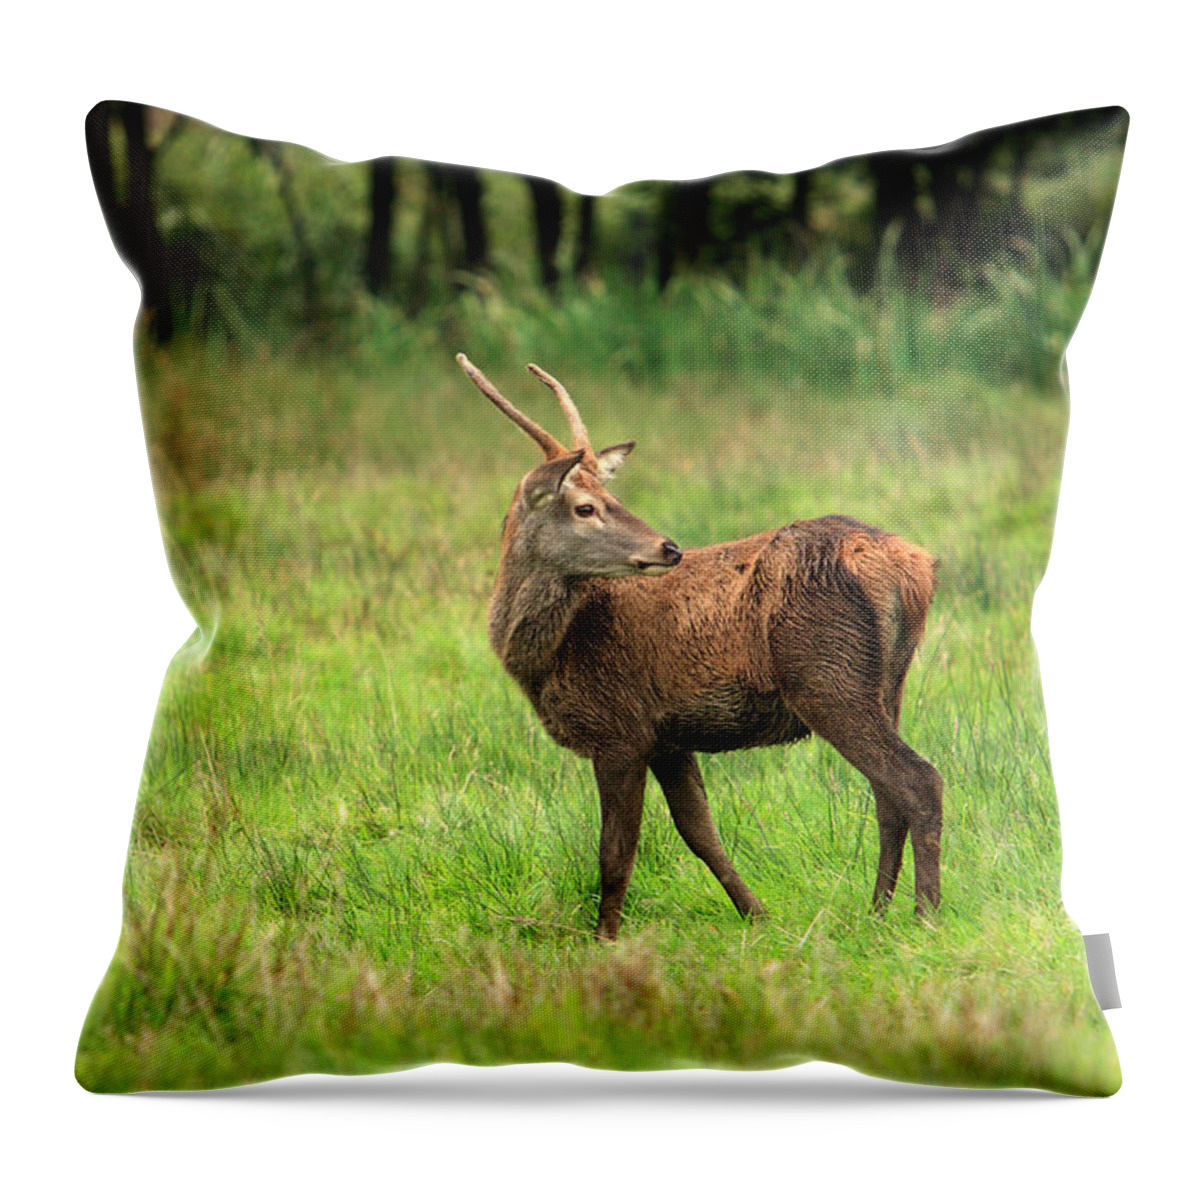 Ireland Throw Pillow featuring the photograph Red Deer Stag by Aidan Moran